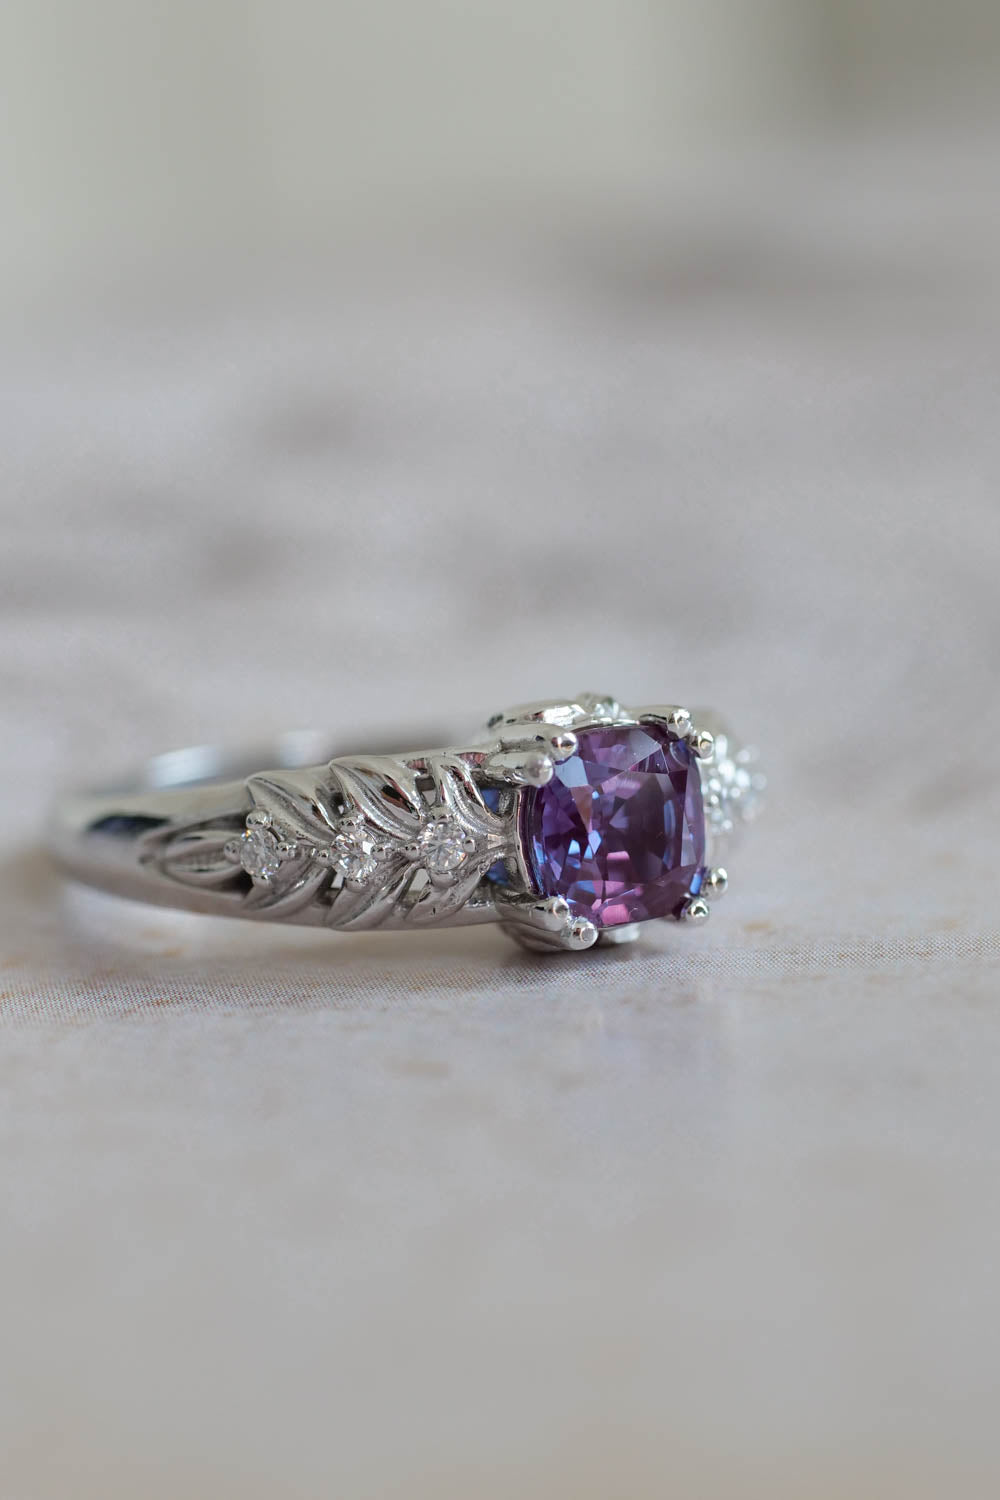 Silvestra is handmade engagement ring, mde of white gold with lab created alexandrite and small diamonds